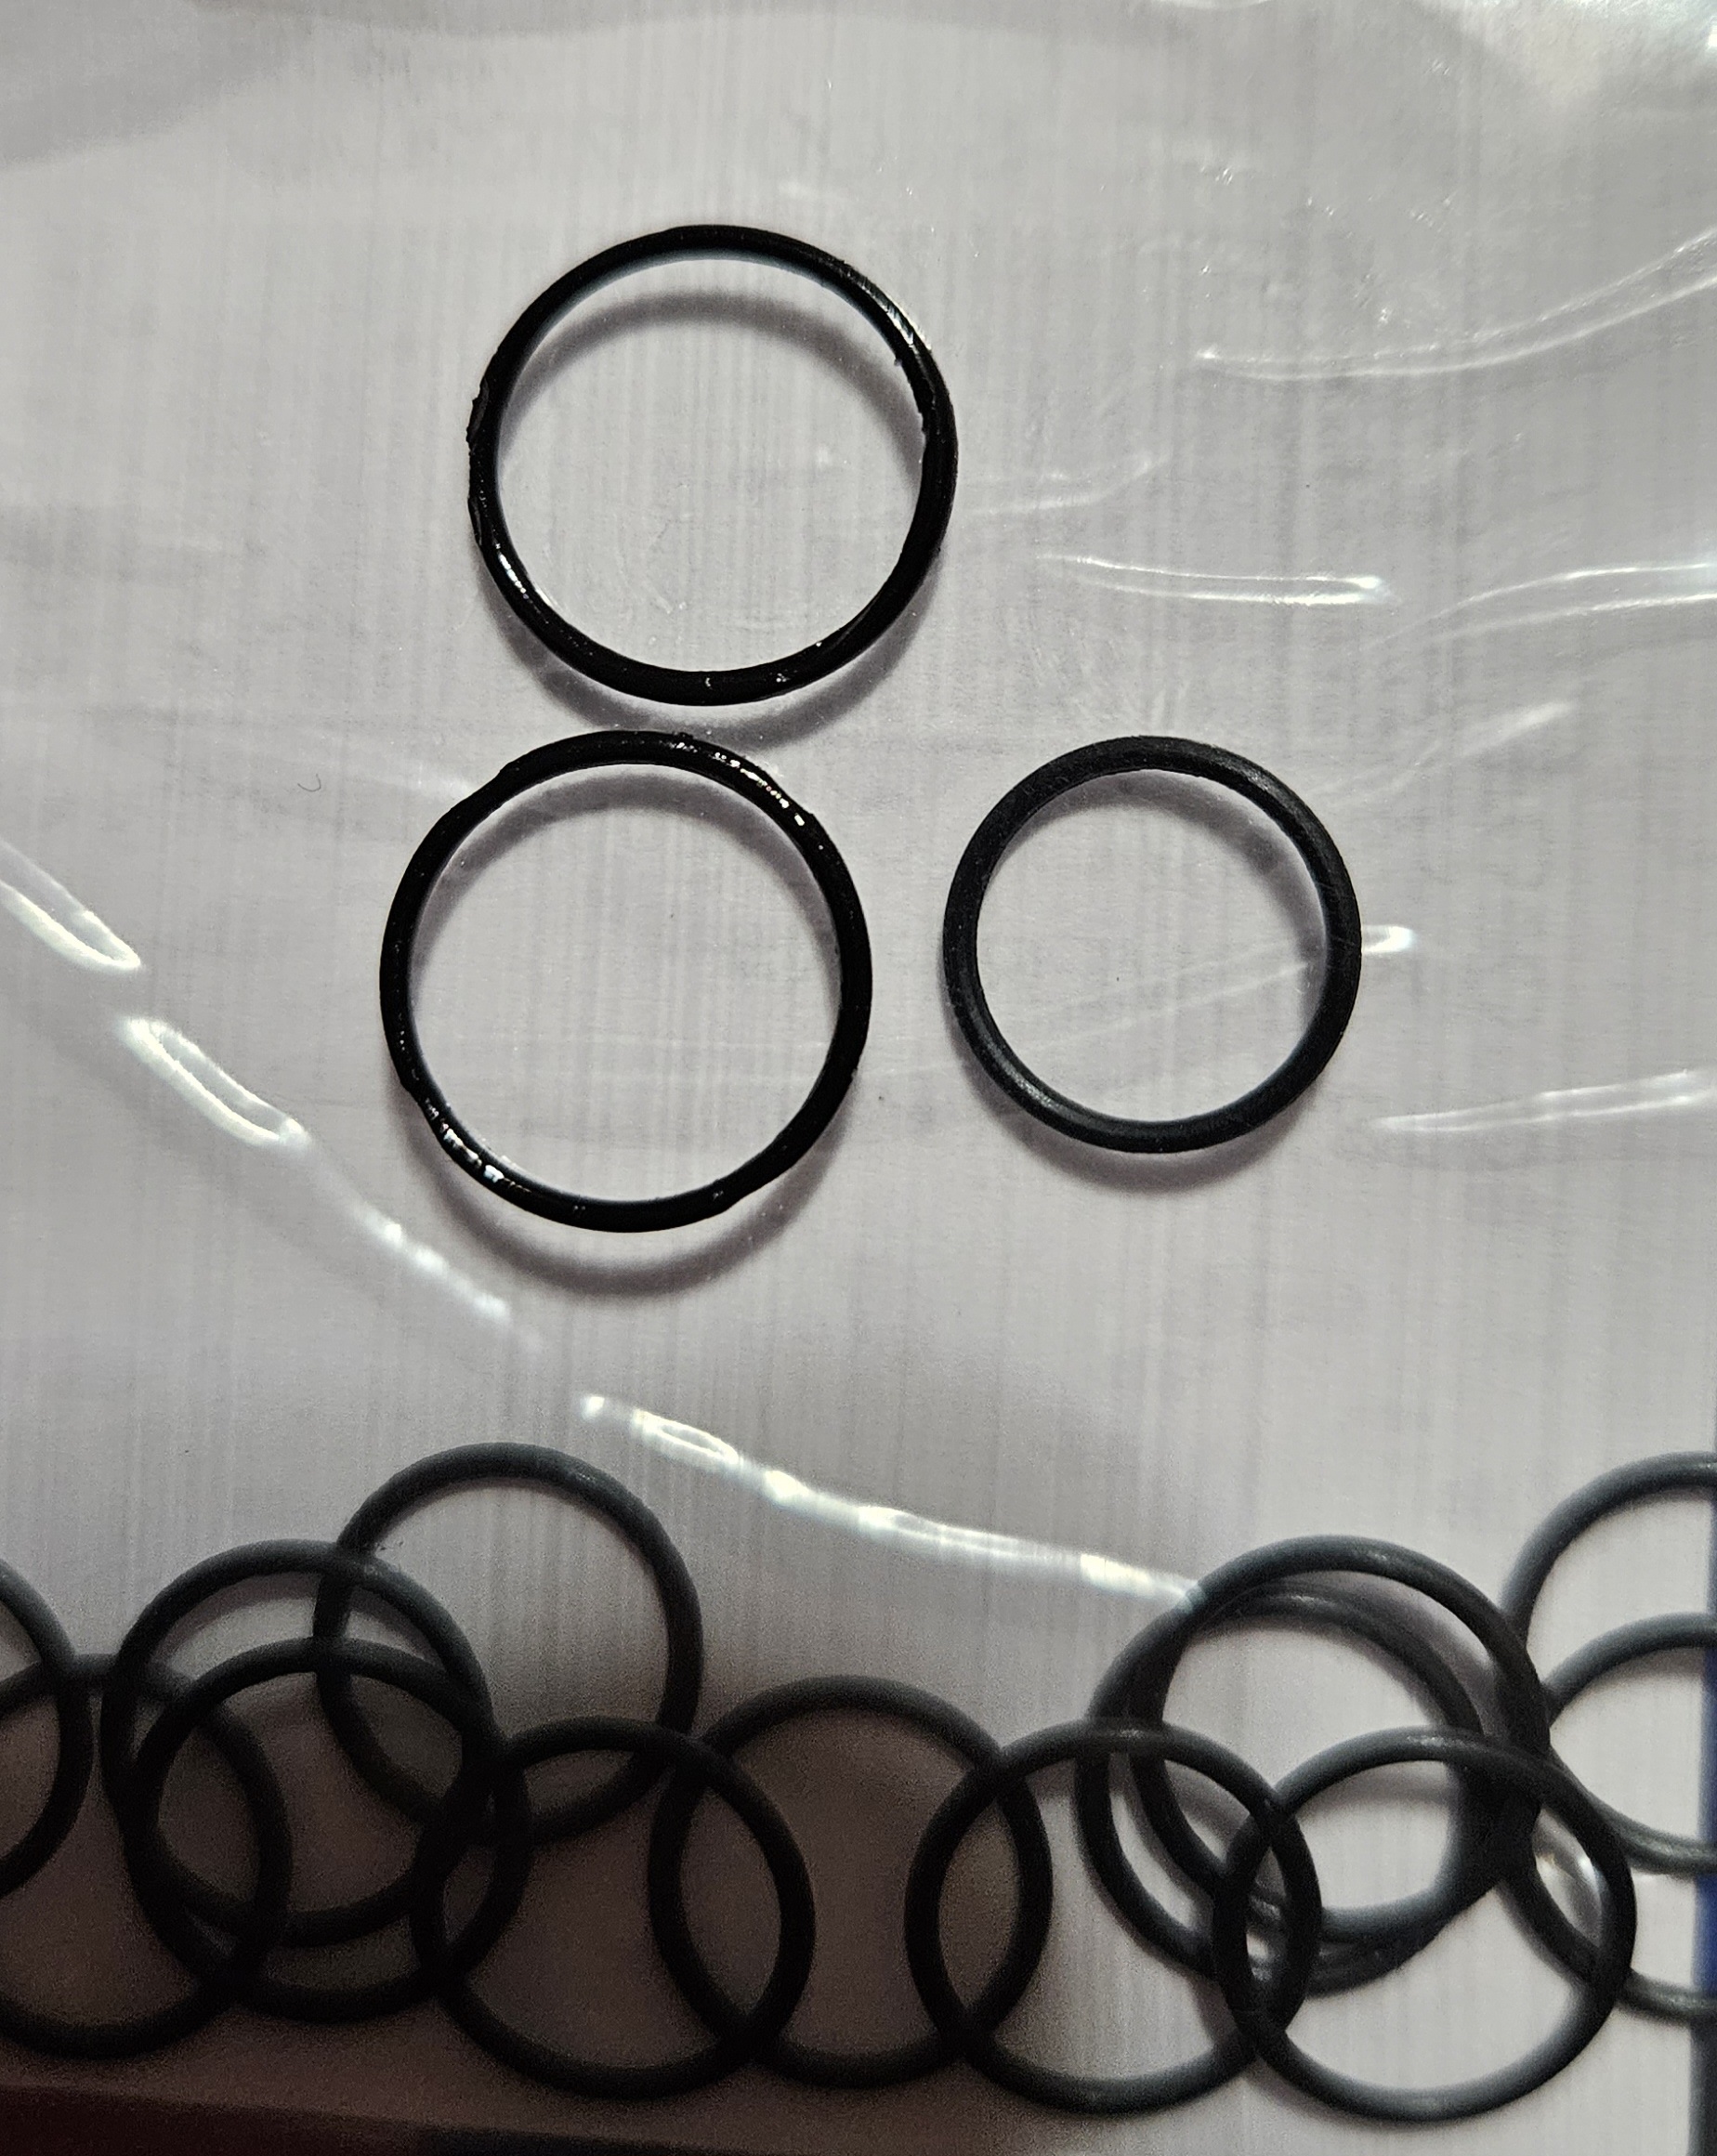 Everything You Need to Know About O-Rings